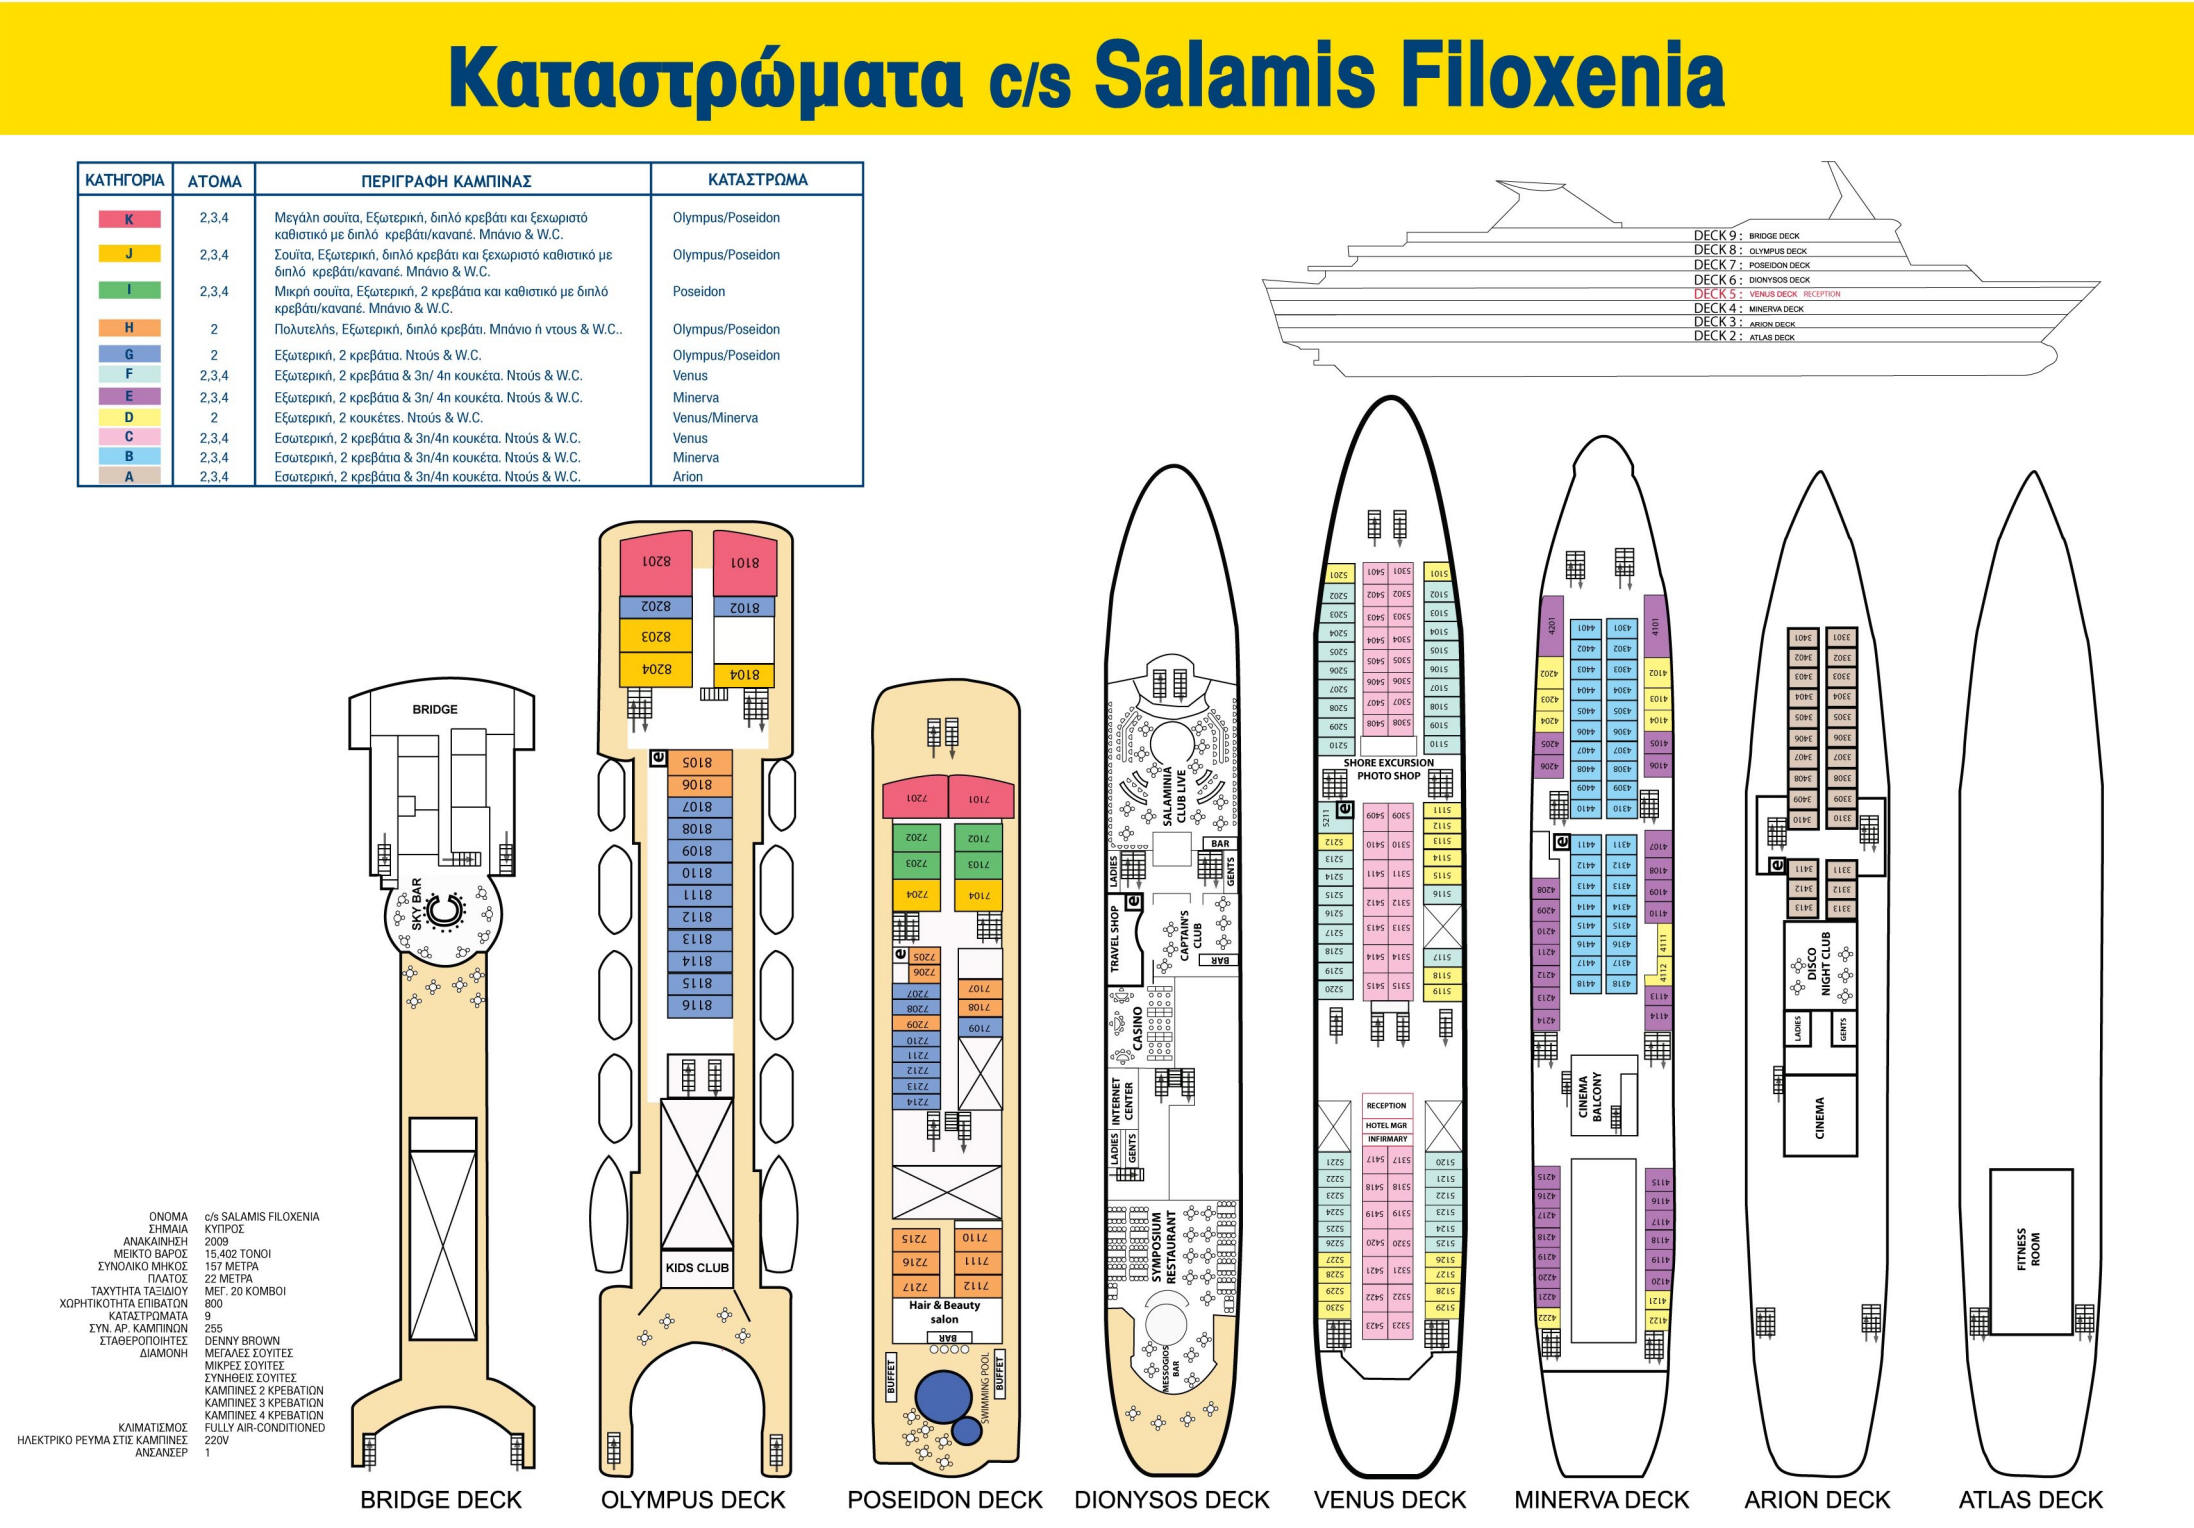 The deck plan of the Salamis Filoxenia